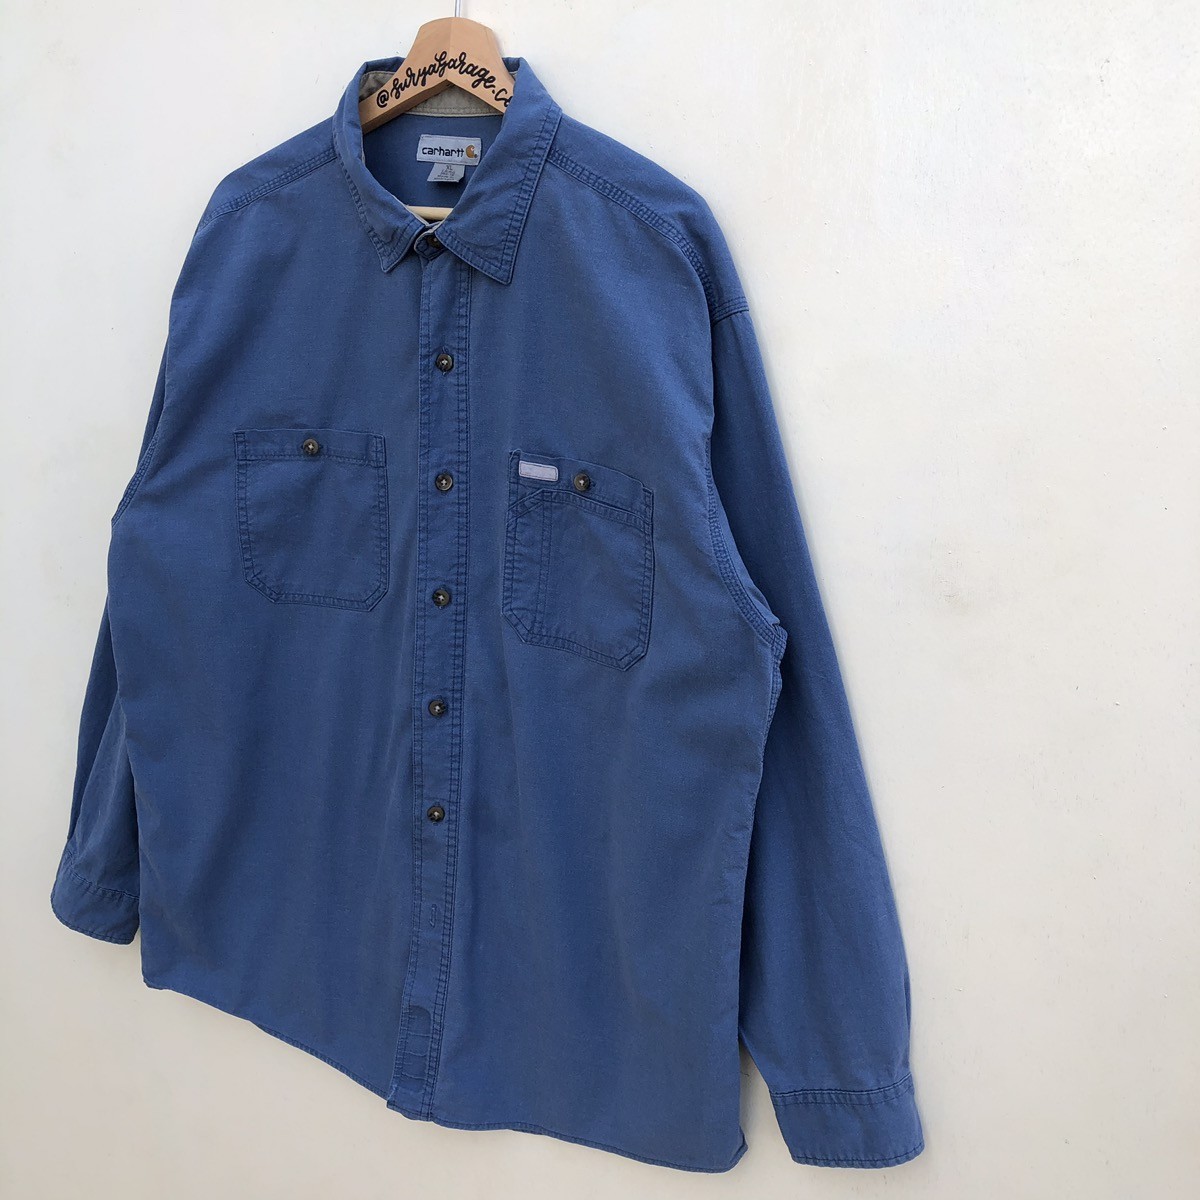 Cowley “Designed Exclusively For Rental” Shirt - 5